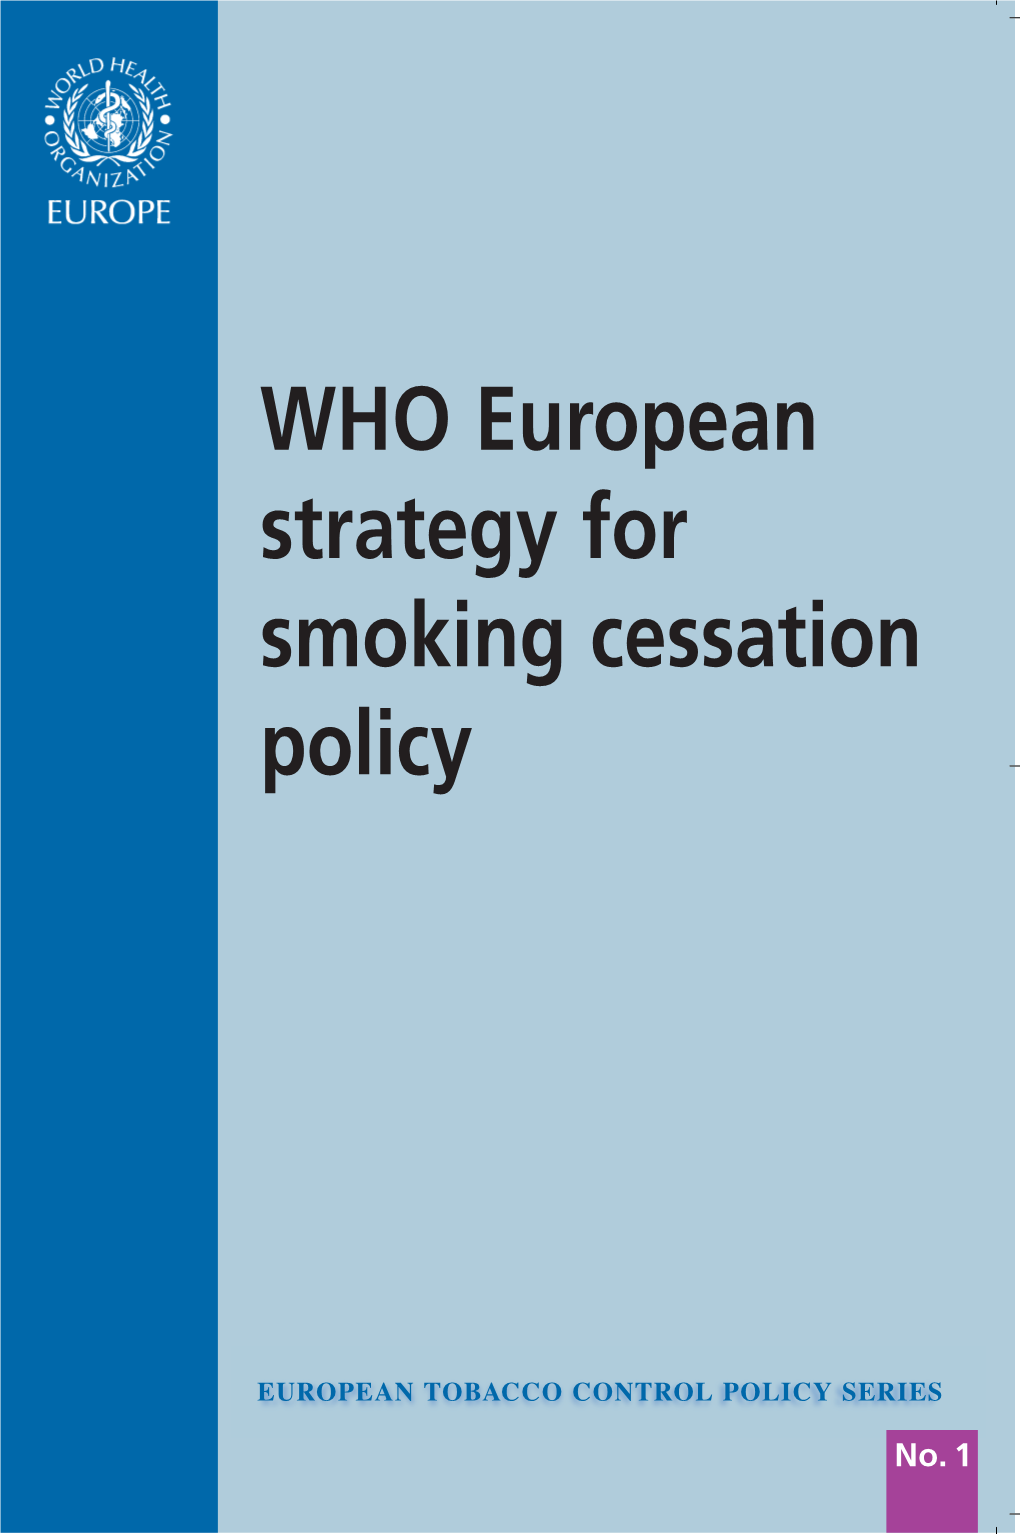 WHO European Strategy for Smoking Cessation Policy